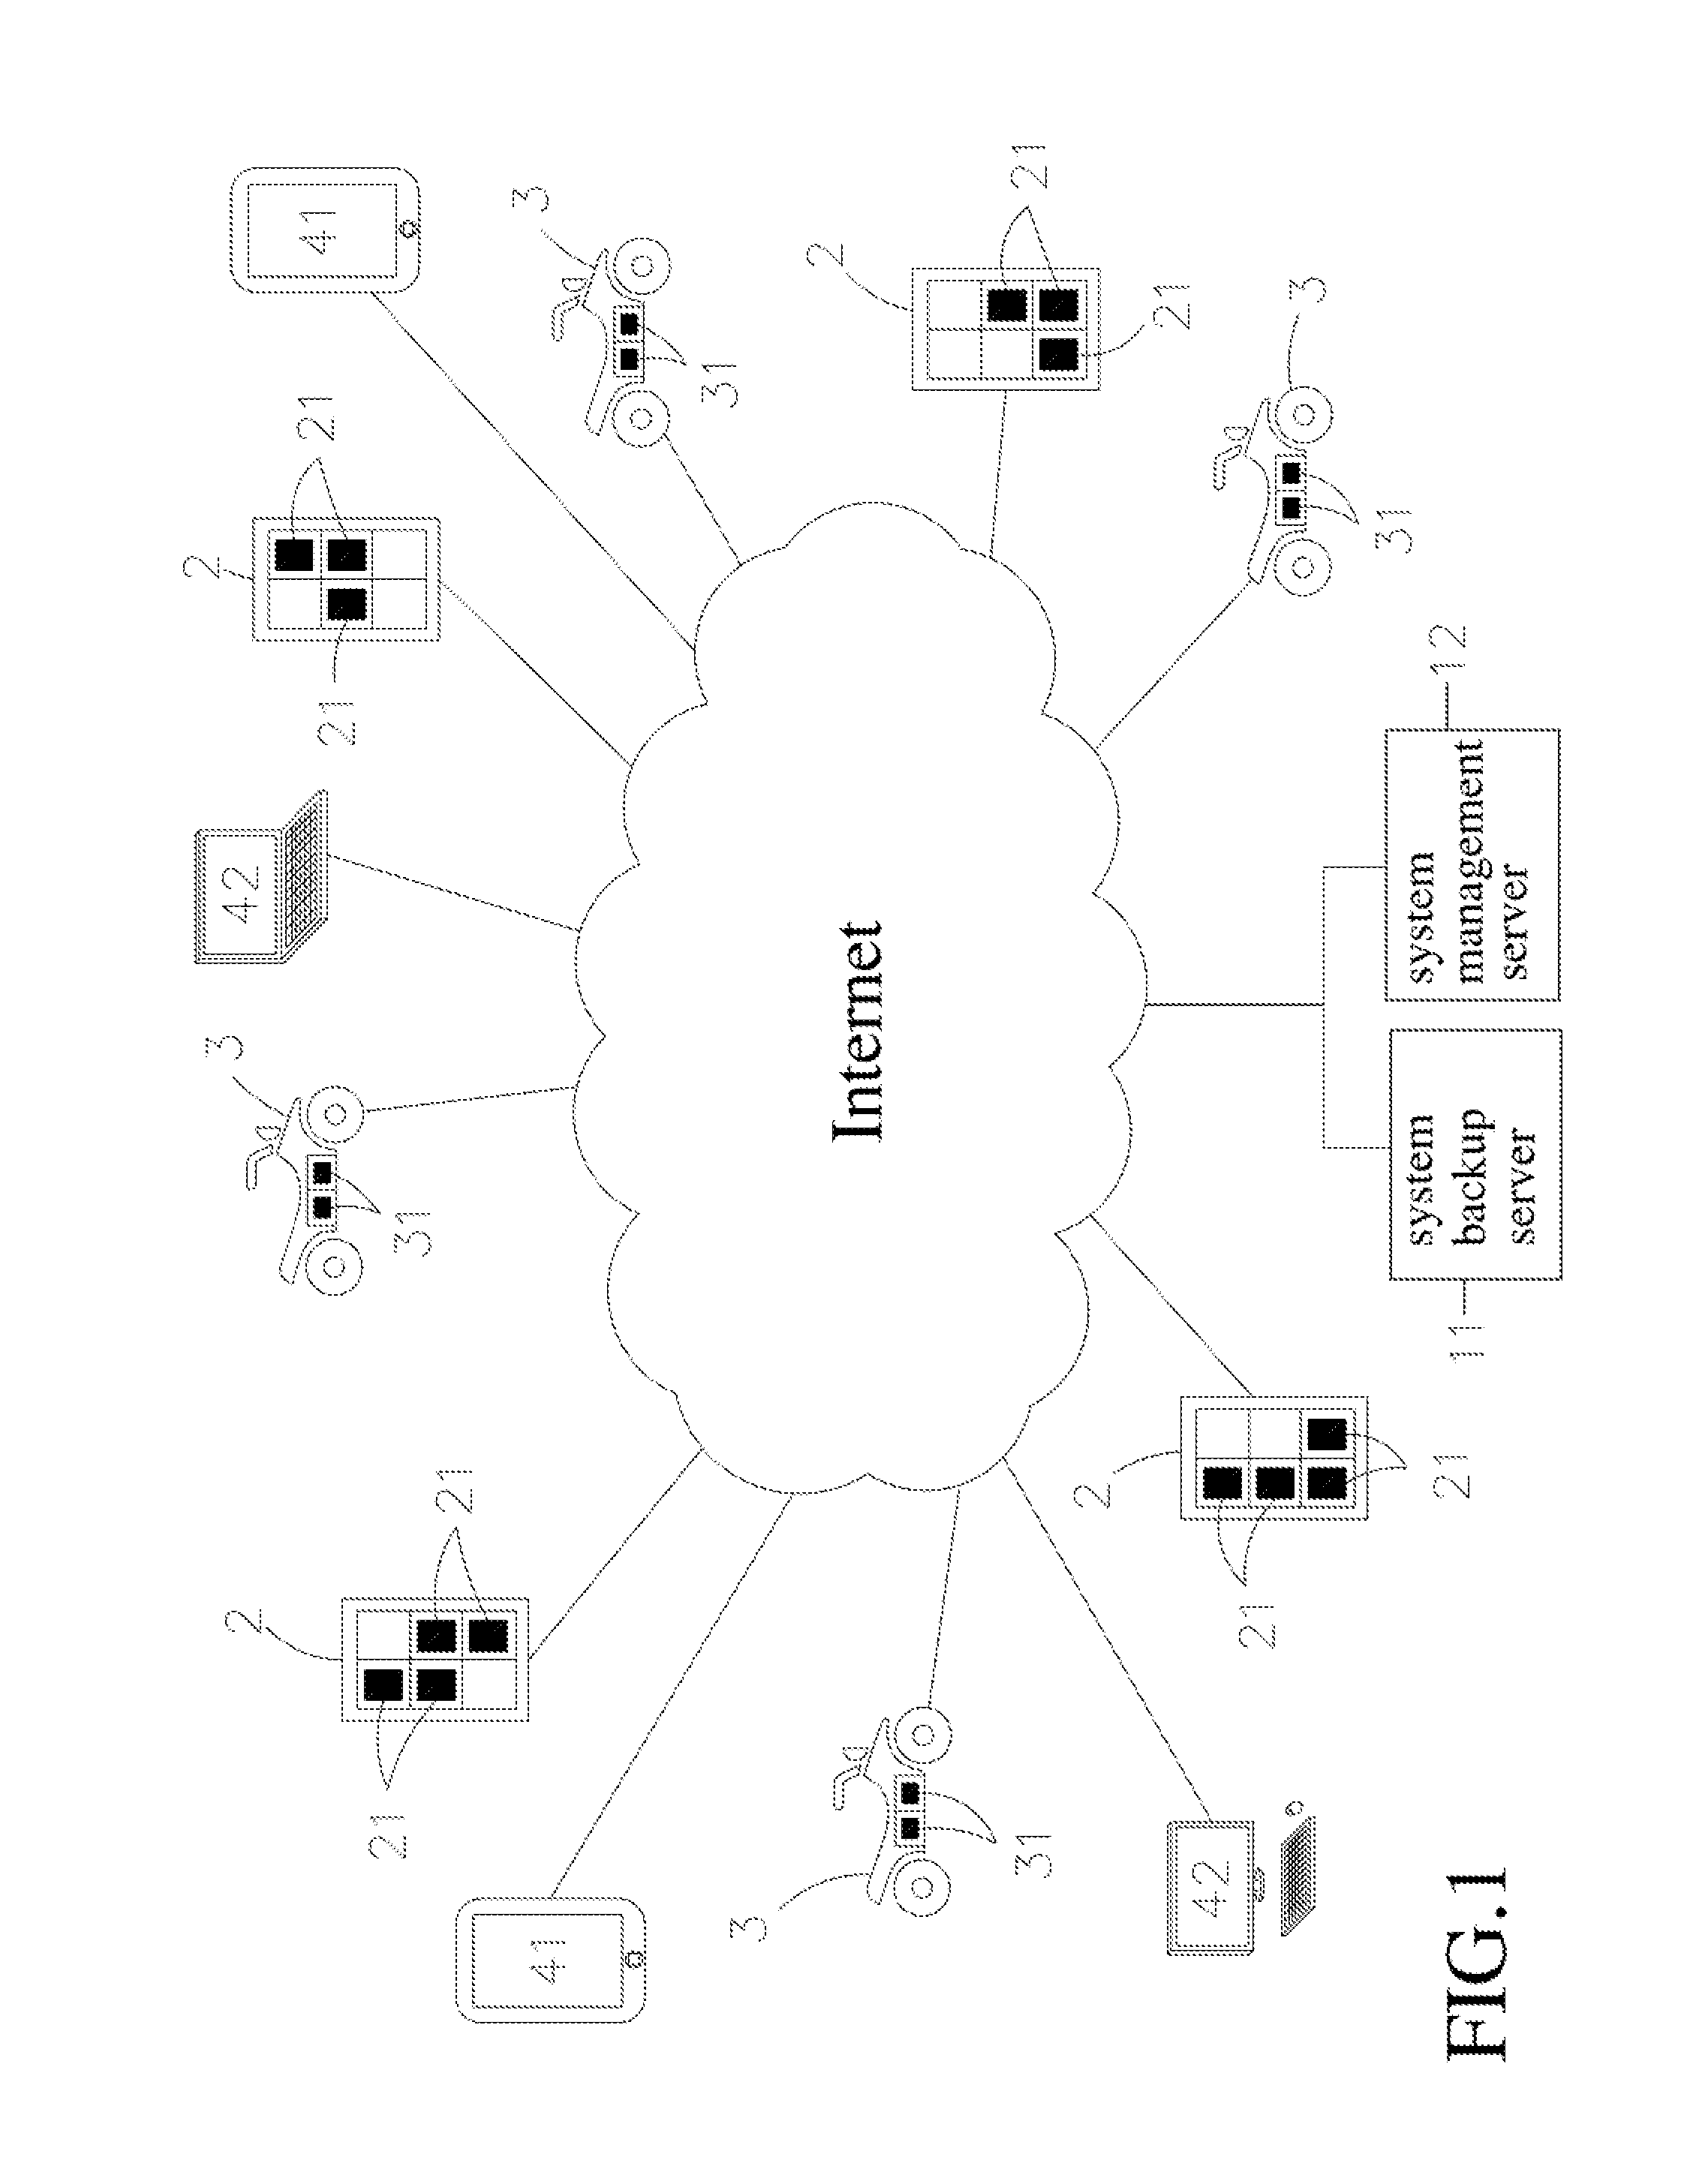 Regional electric vehicle sharing and management system and method